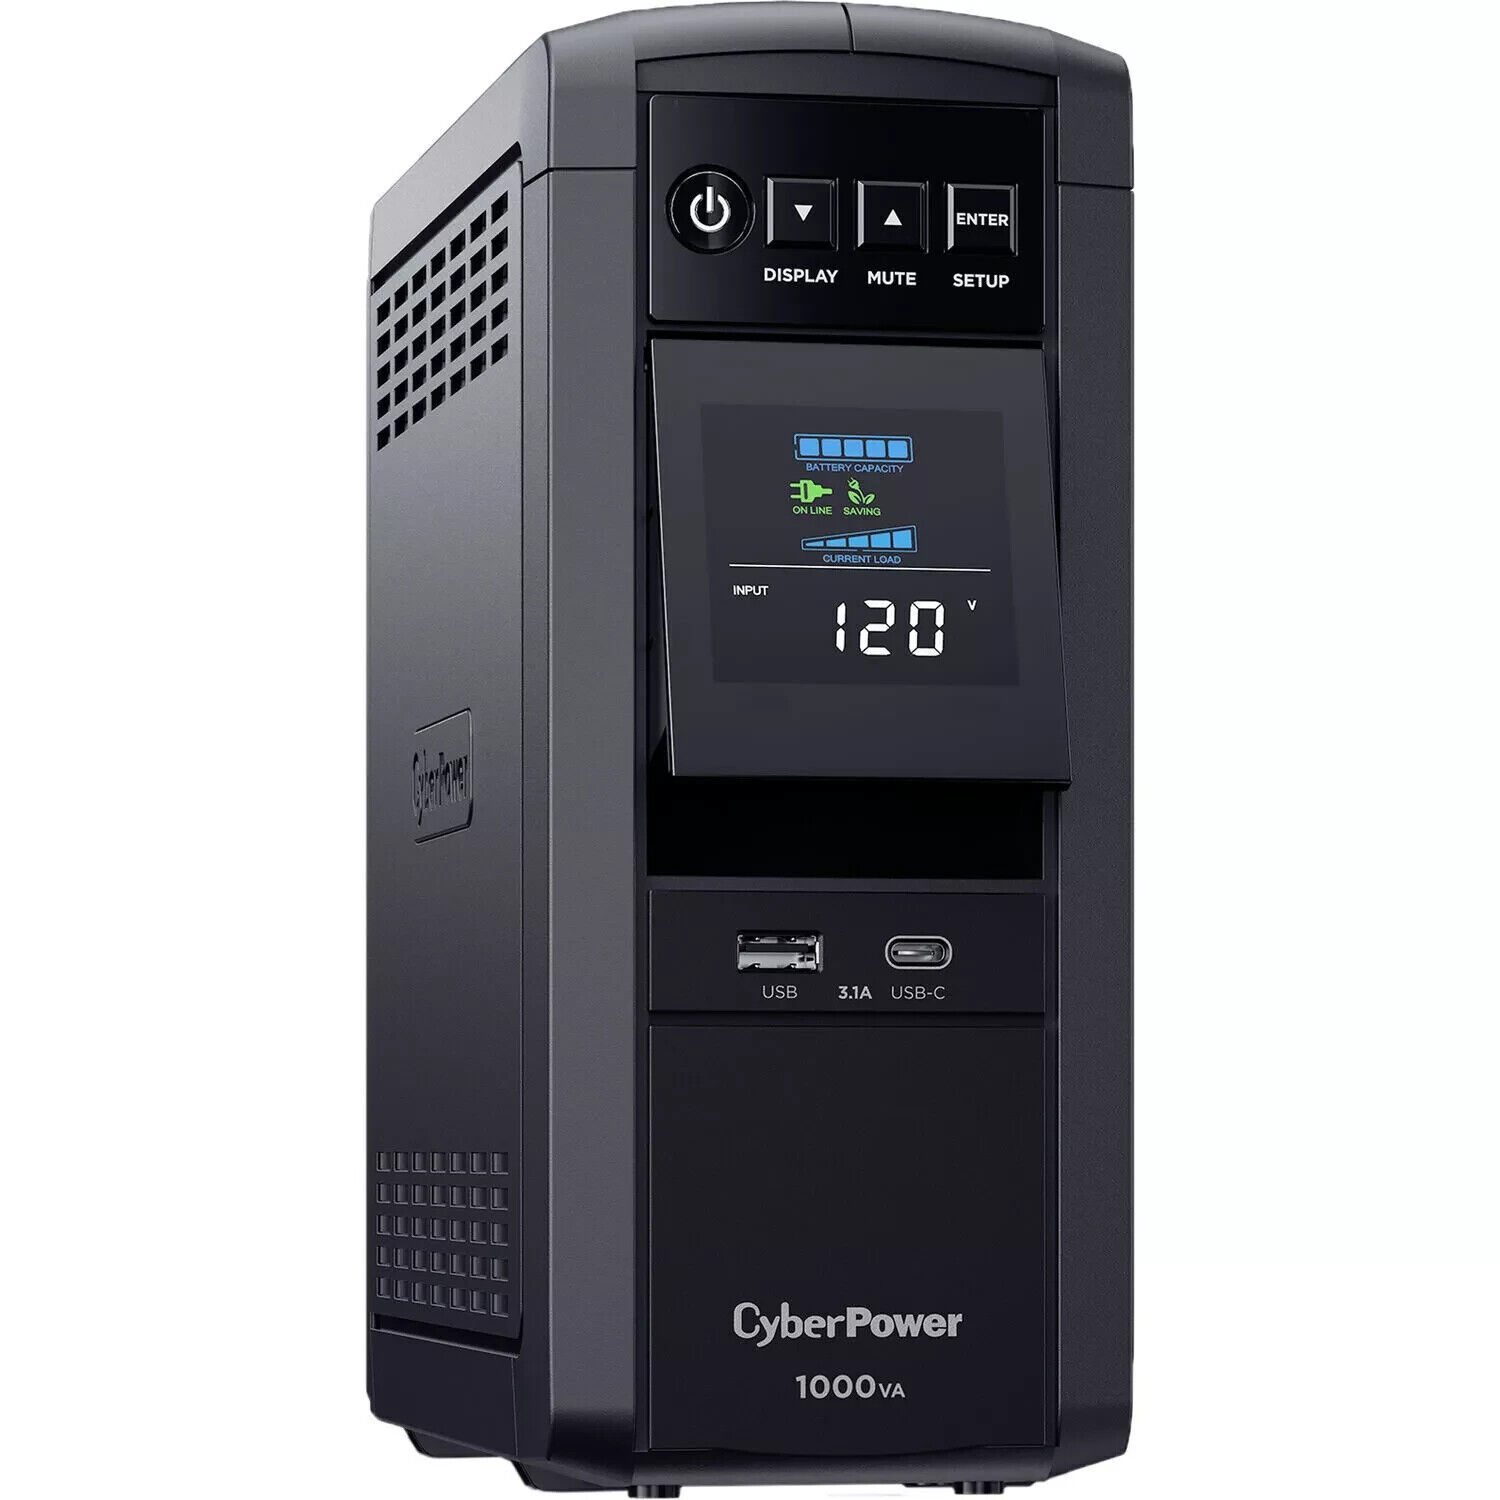 OPEN BOX CyberPower CP1000PFCLCD-R 1000VA/600W Pure Sine Wave UPS, EXCELLENT